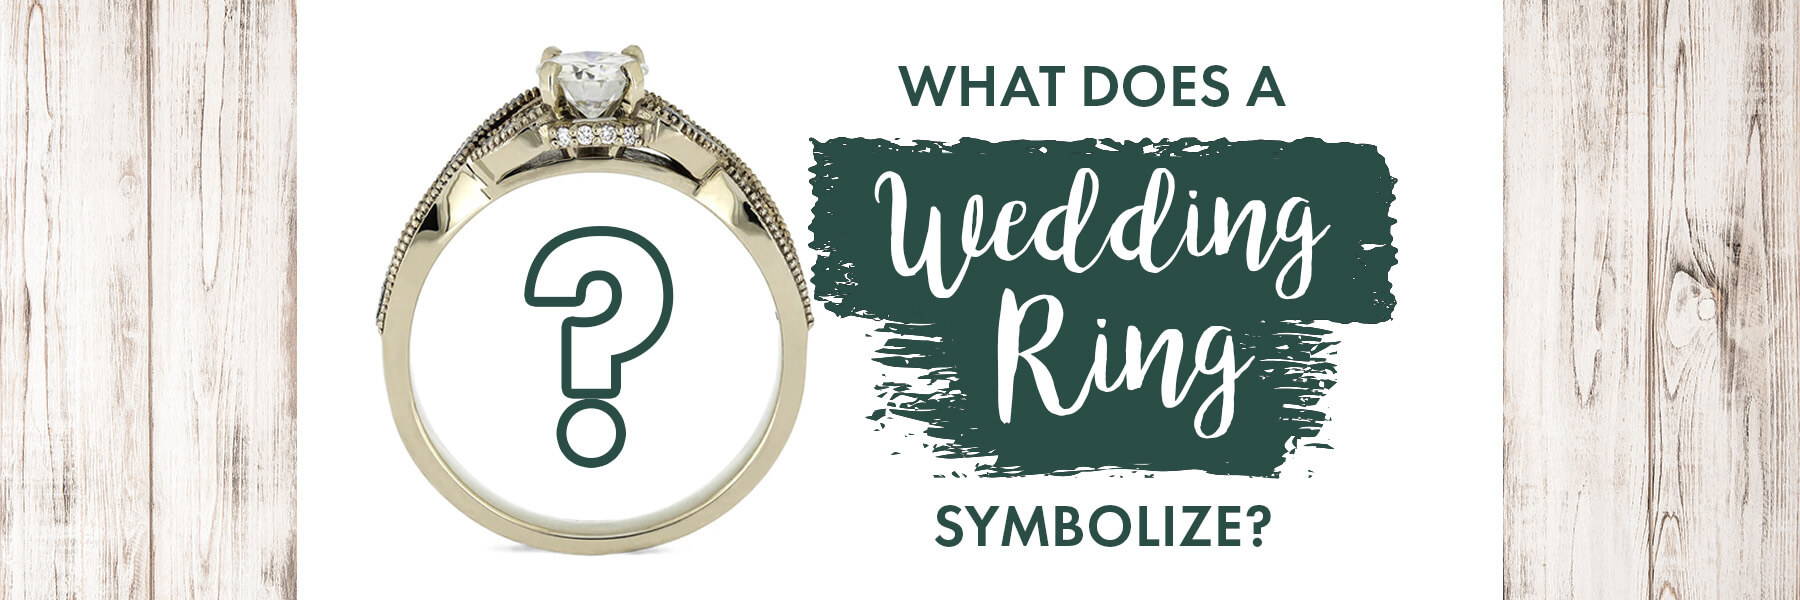 What Does a Wedding Ring Symbolize?